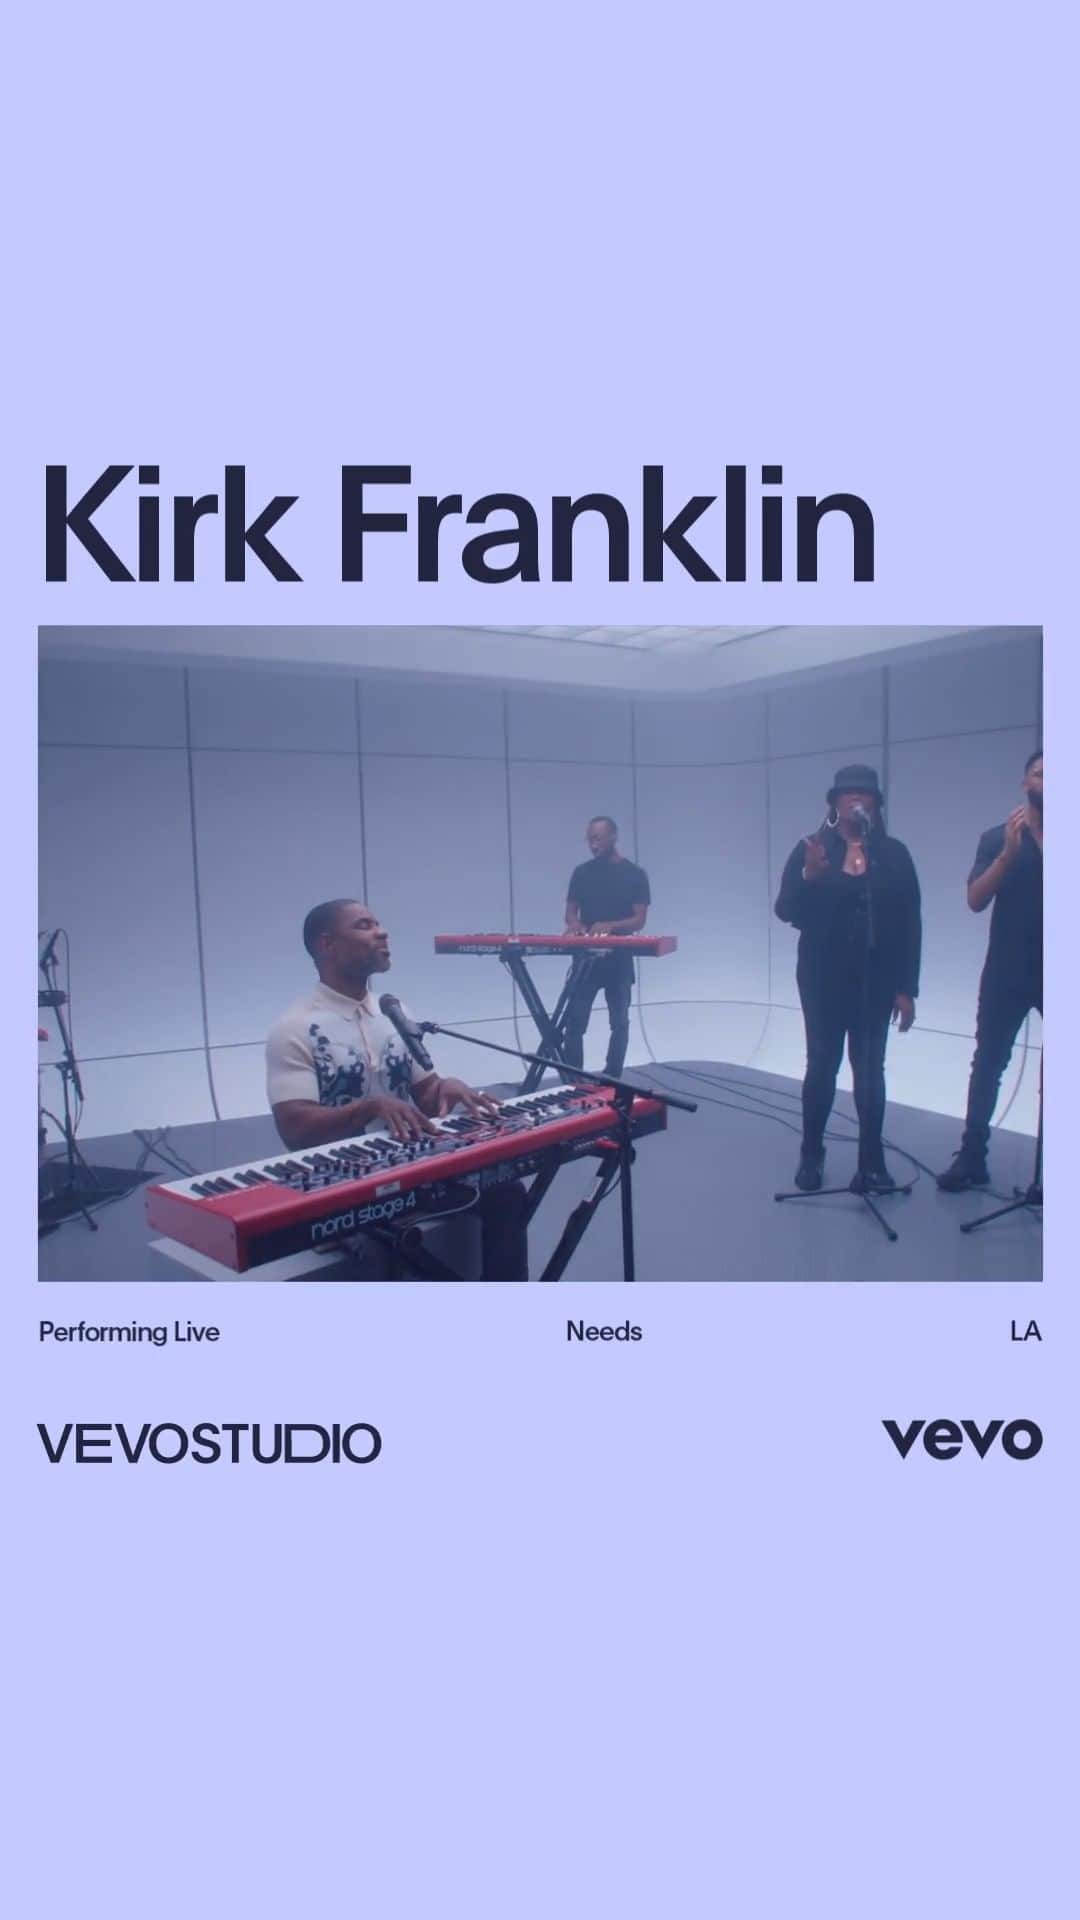 Vevoのインスタグラム：「There's a reason @KirkFranklin put his whole heart into this studio performance of "Needs" - the gospel singer's 13th studio album 'Father's Day' processes reuniting with his biological dad after decades apart. Give it a watch now.  ⠀⠀⠀⠀⠀⠀⠀⠀⠀ ▶️ [Link in bio]」